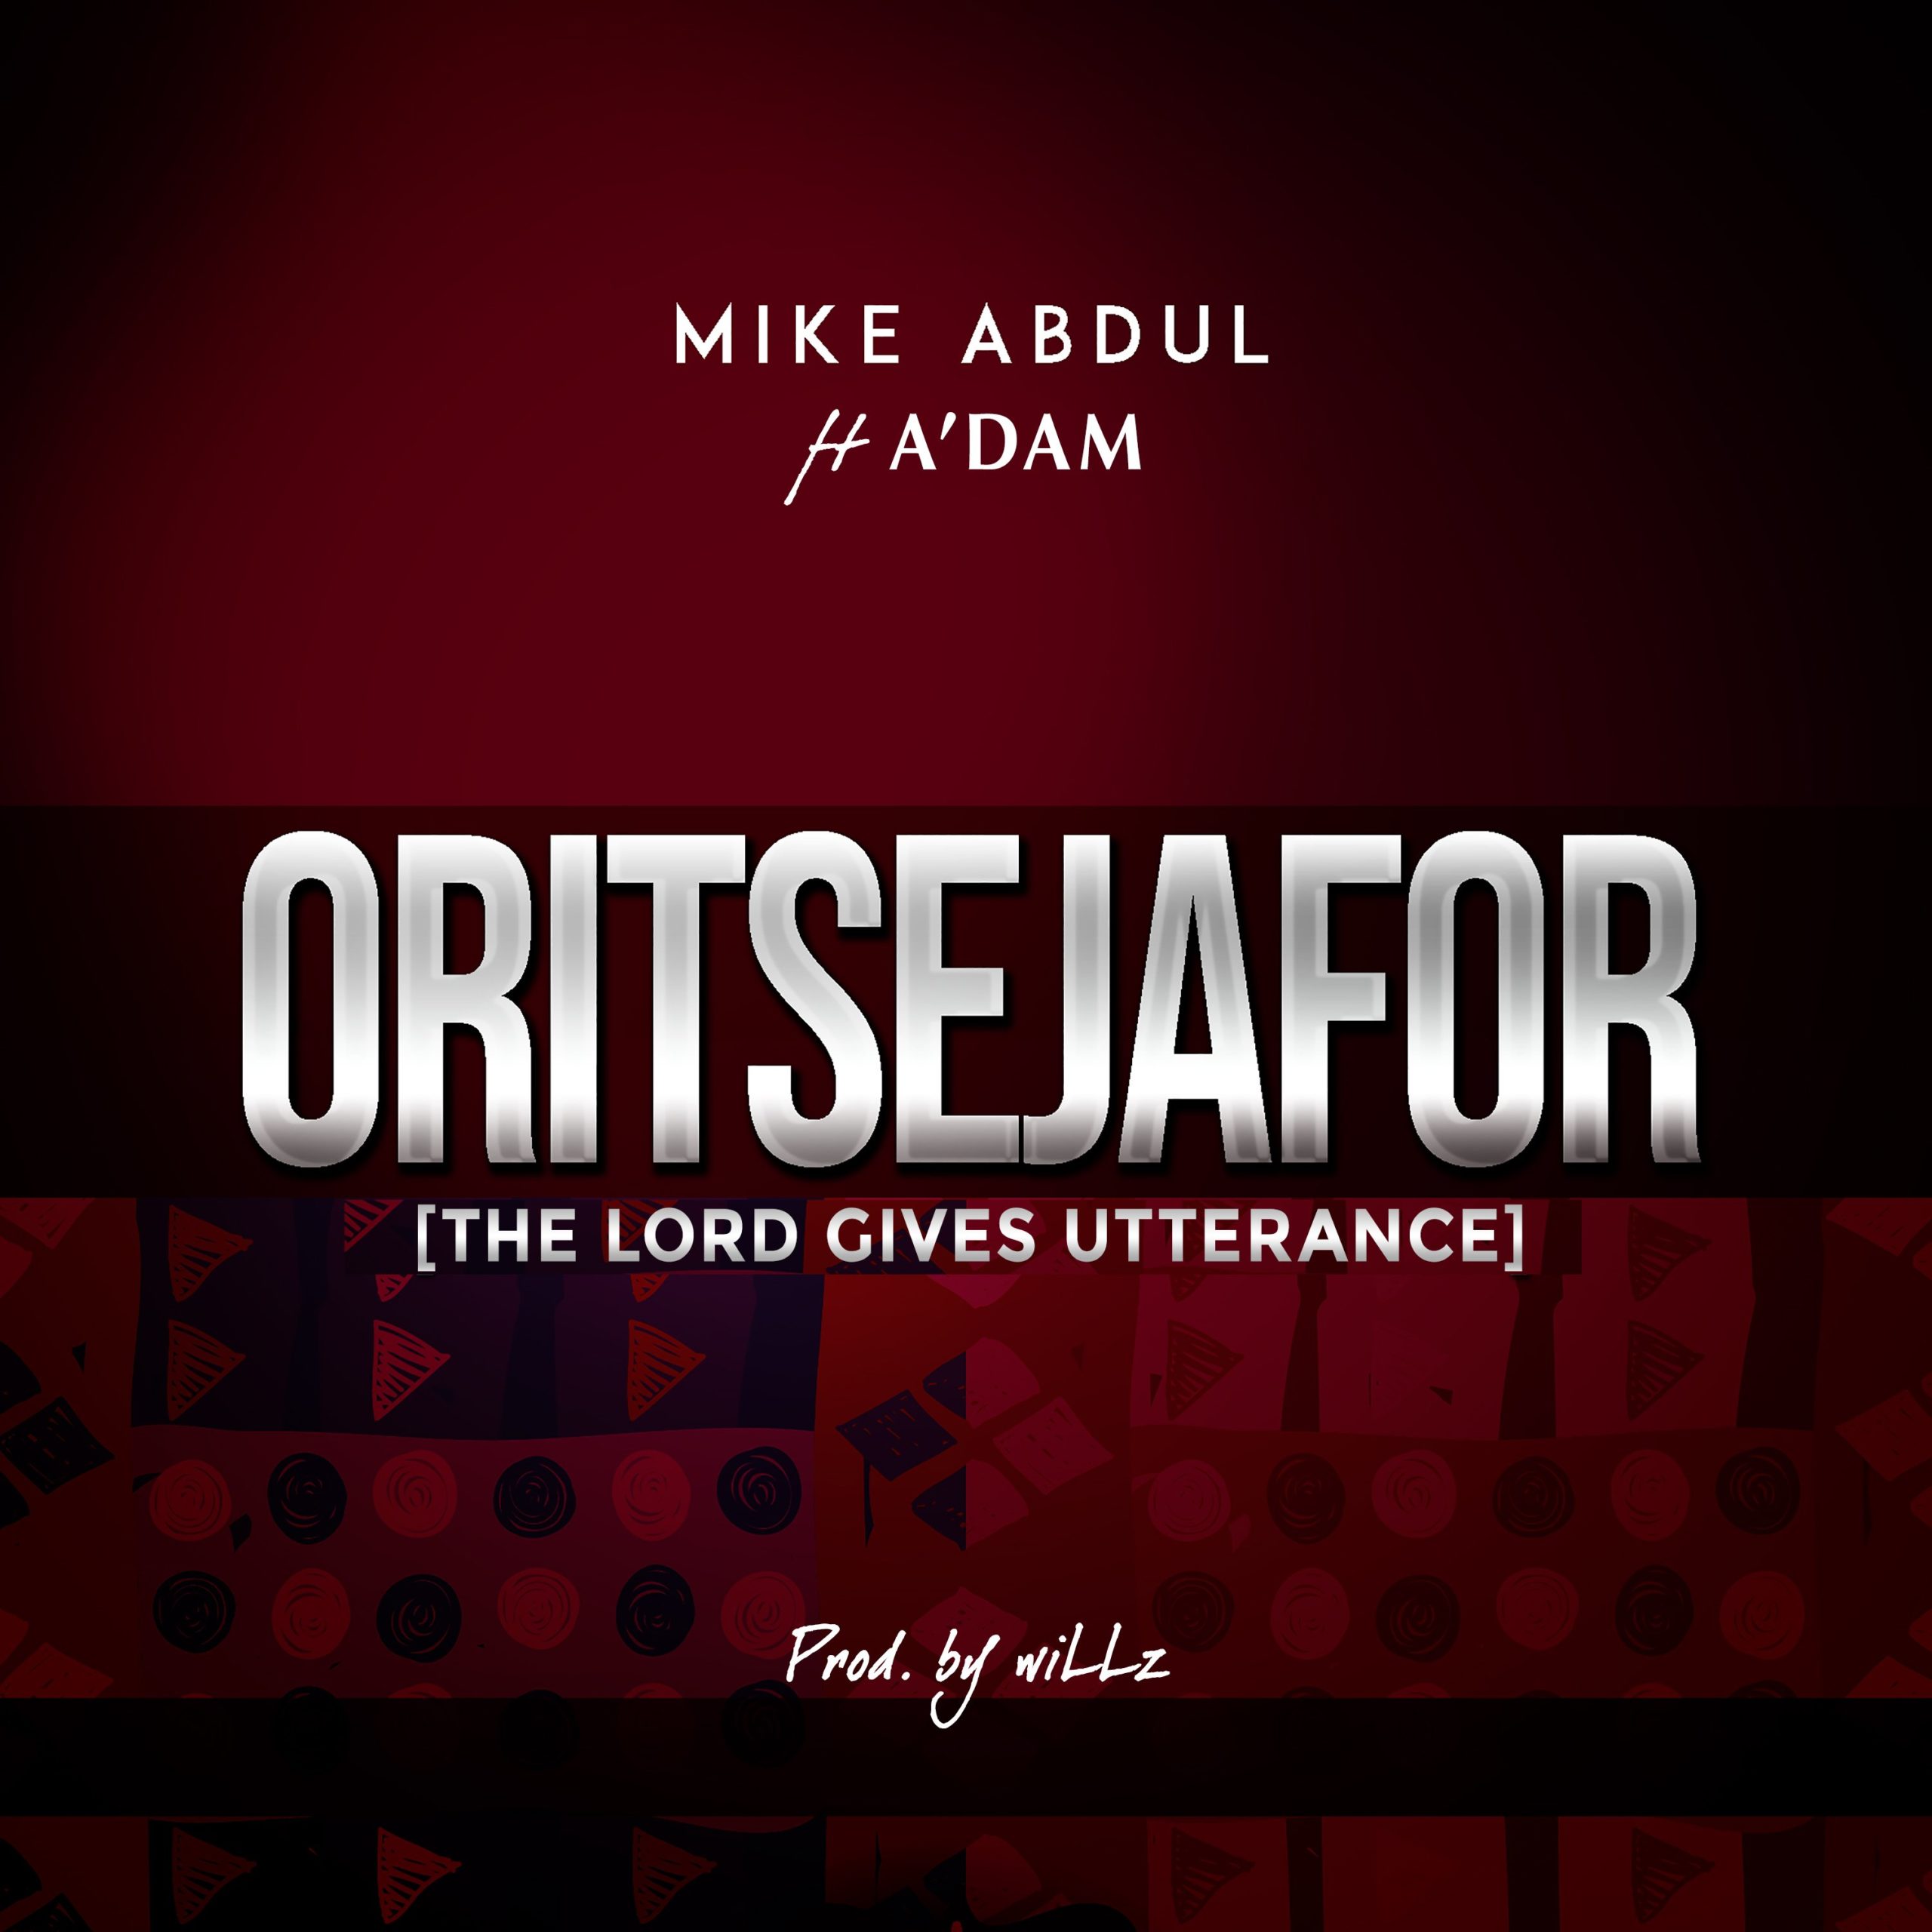 DOWNLOAD Music: Mike Abdul - Oritsejafor (The Lord Gives Utterance) ft. A'Dam